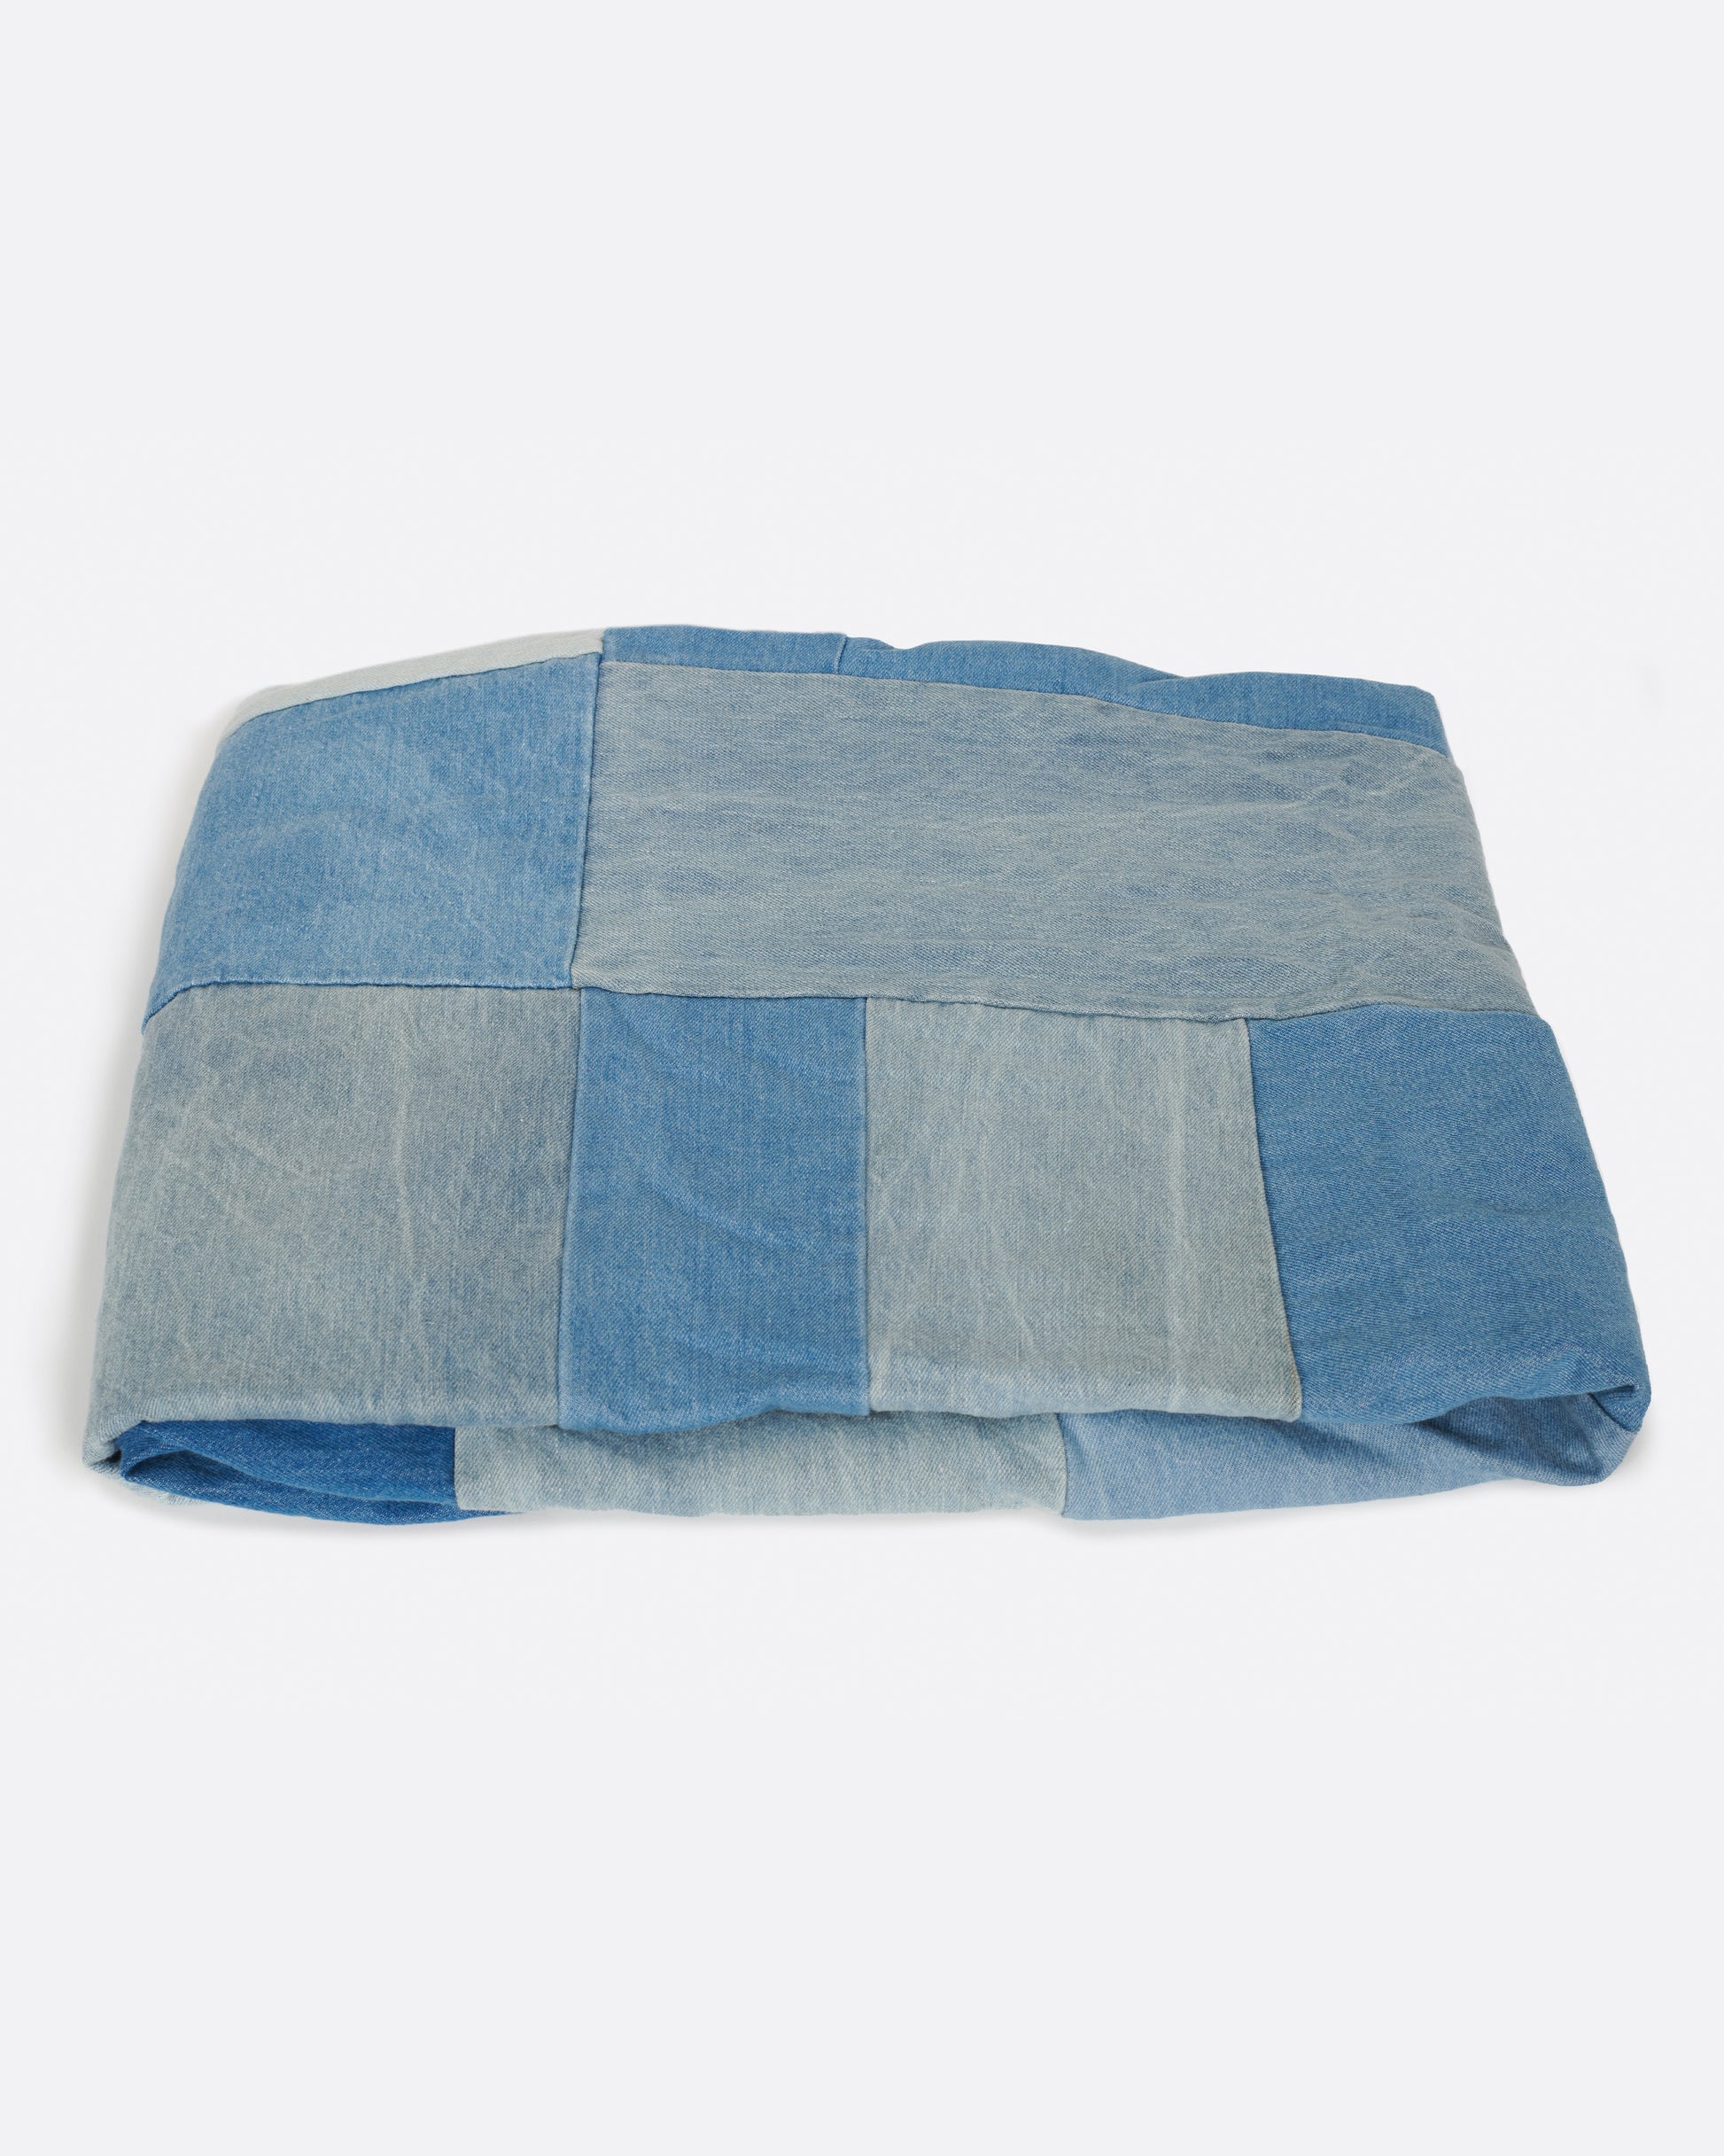 A handcrafted blanket made from pieces of dead stock denim, perfect for picnics.